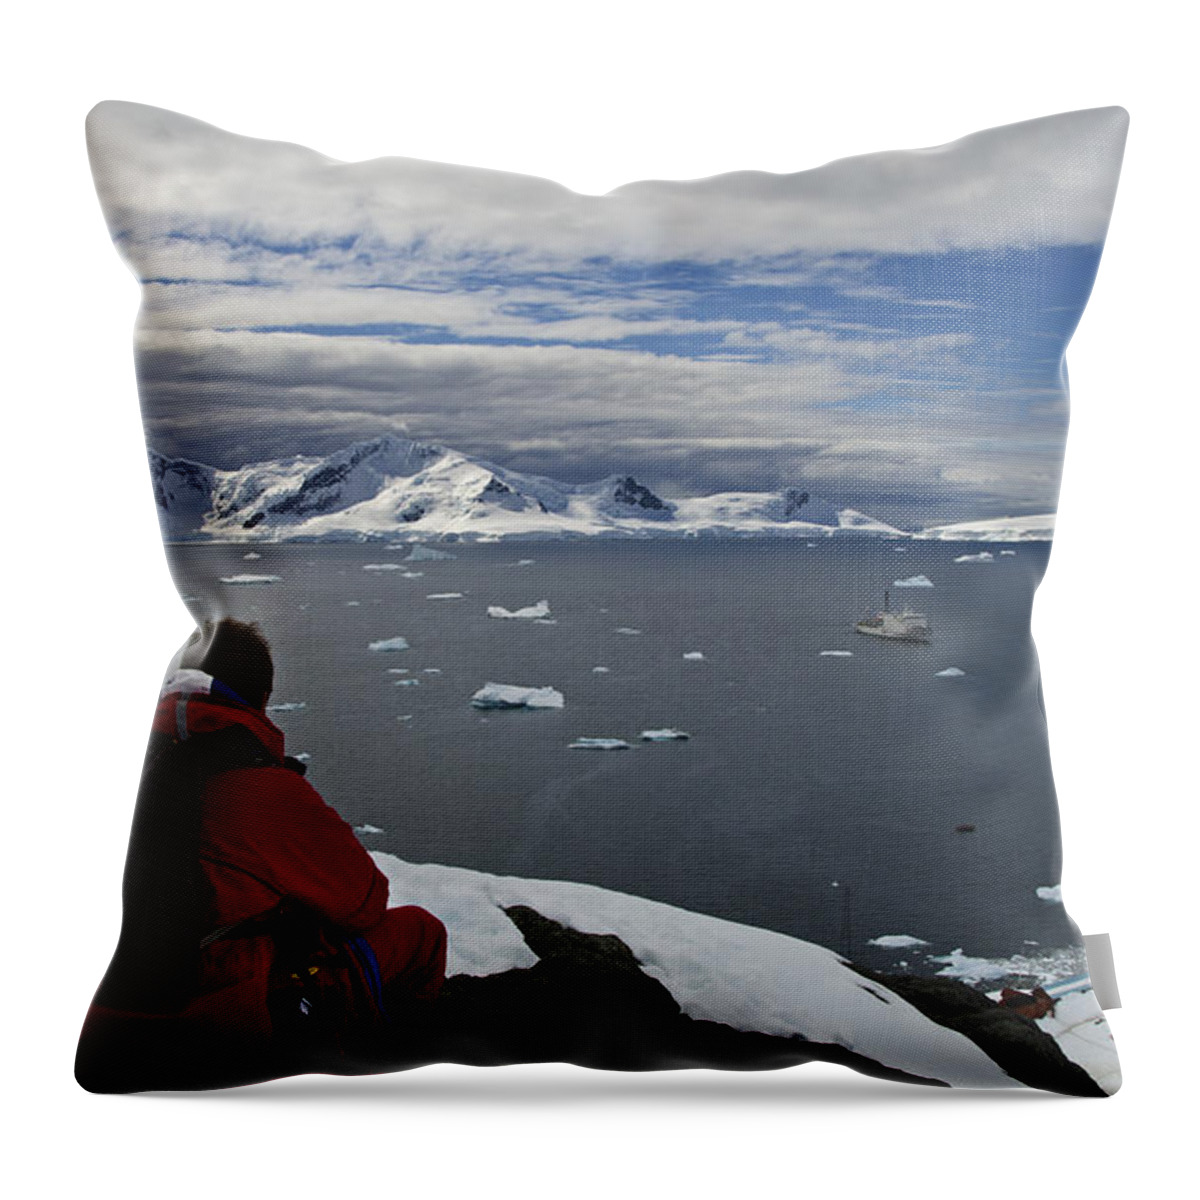 Festblues Throw Pillow featuring the photograph In Paradise... by Nina Stavlund